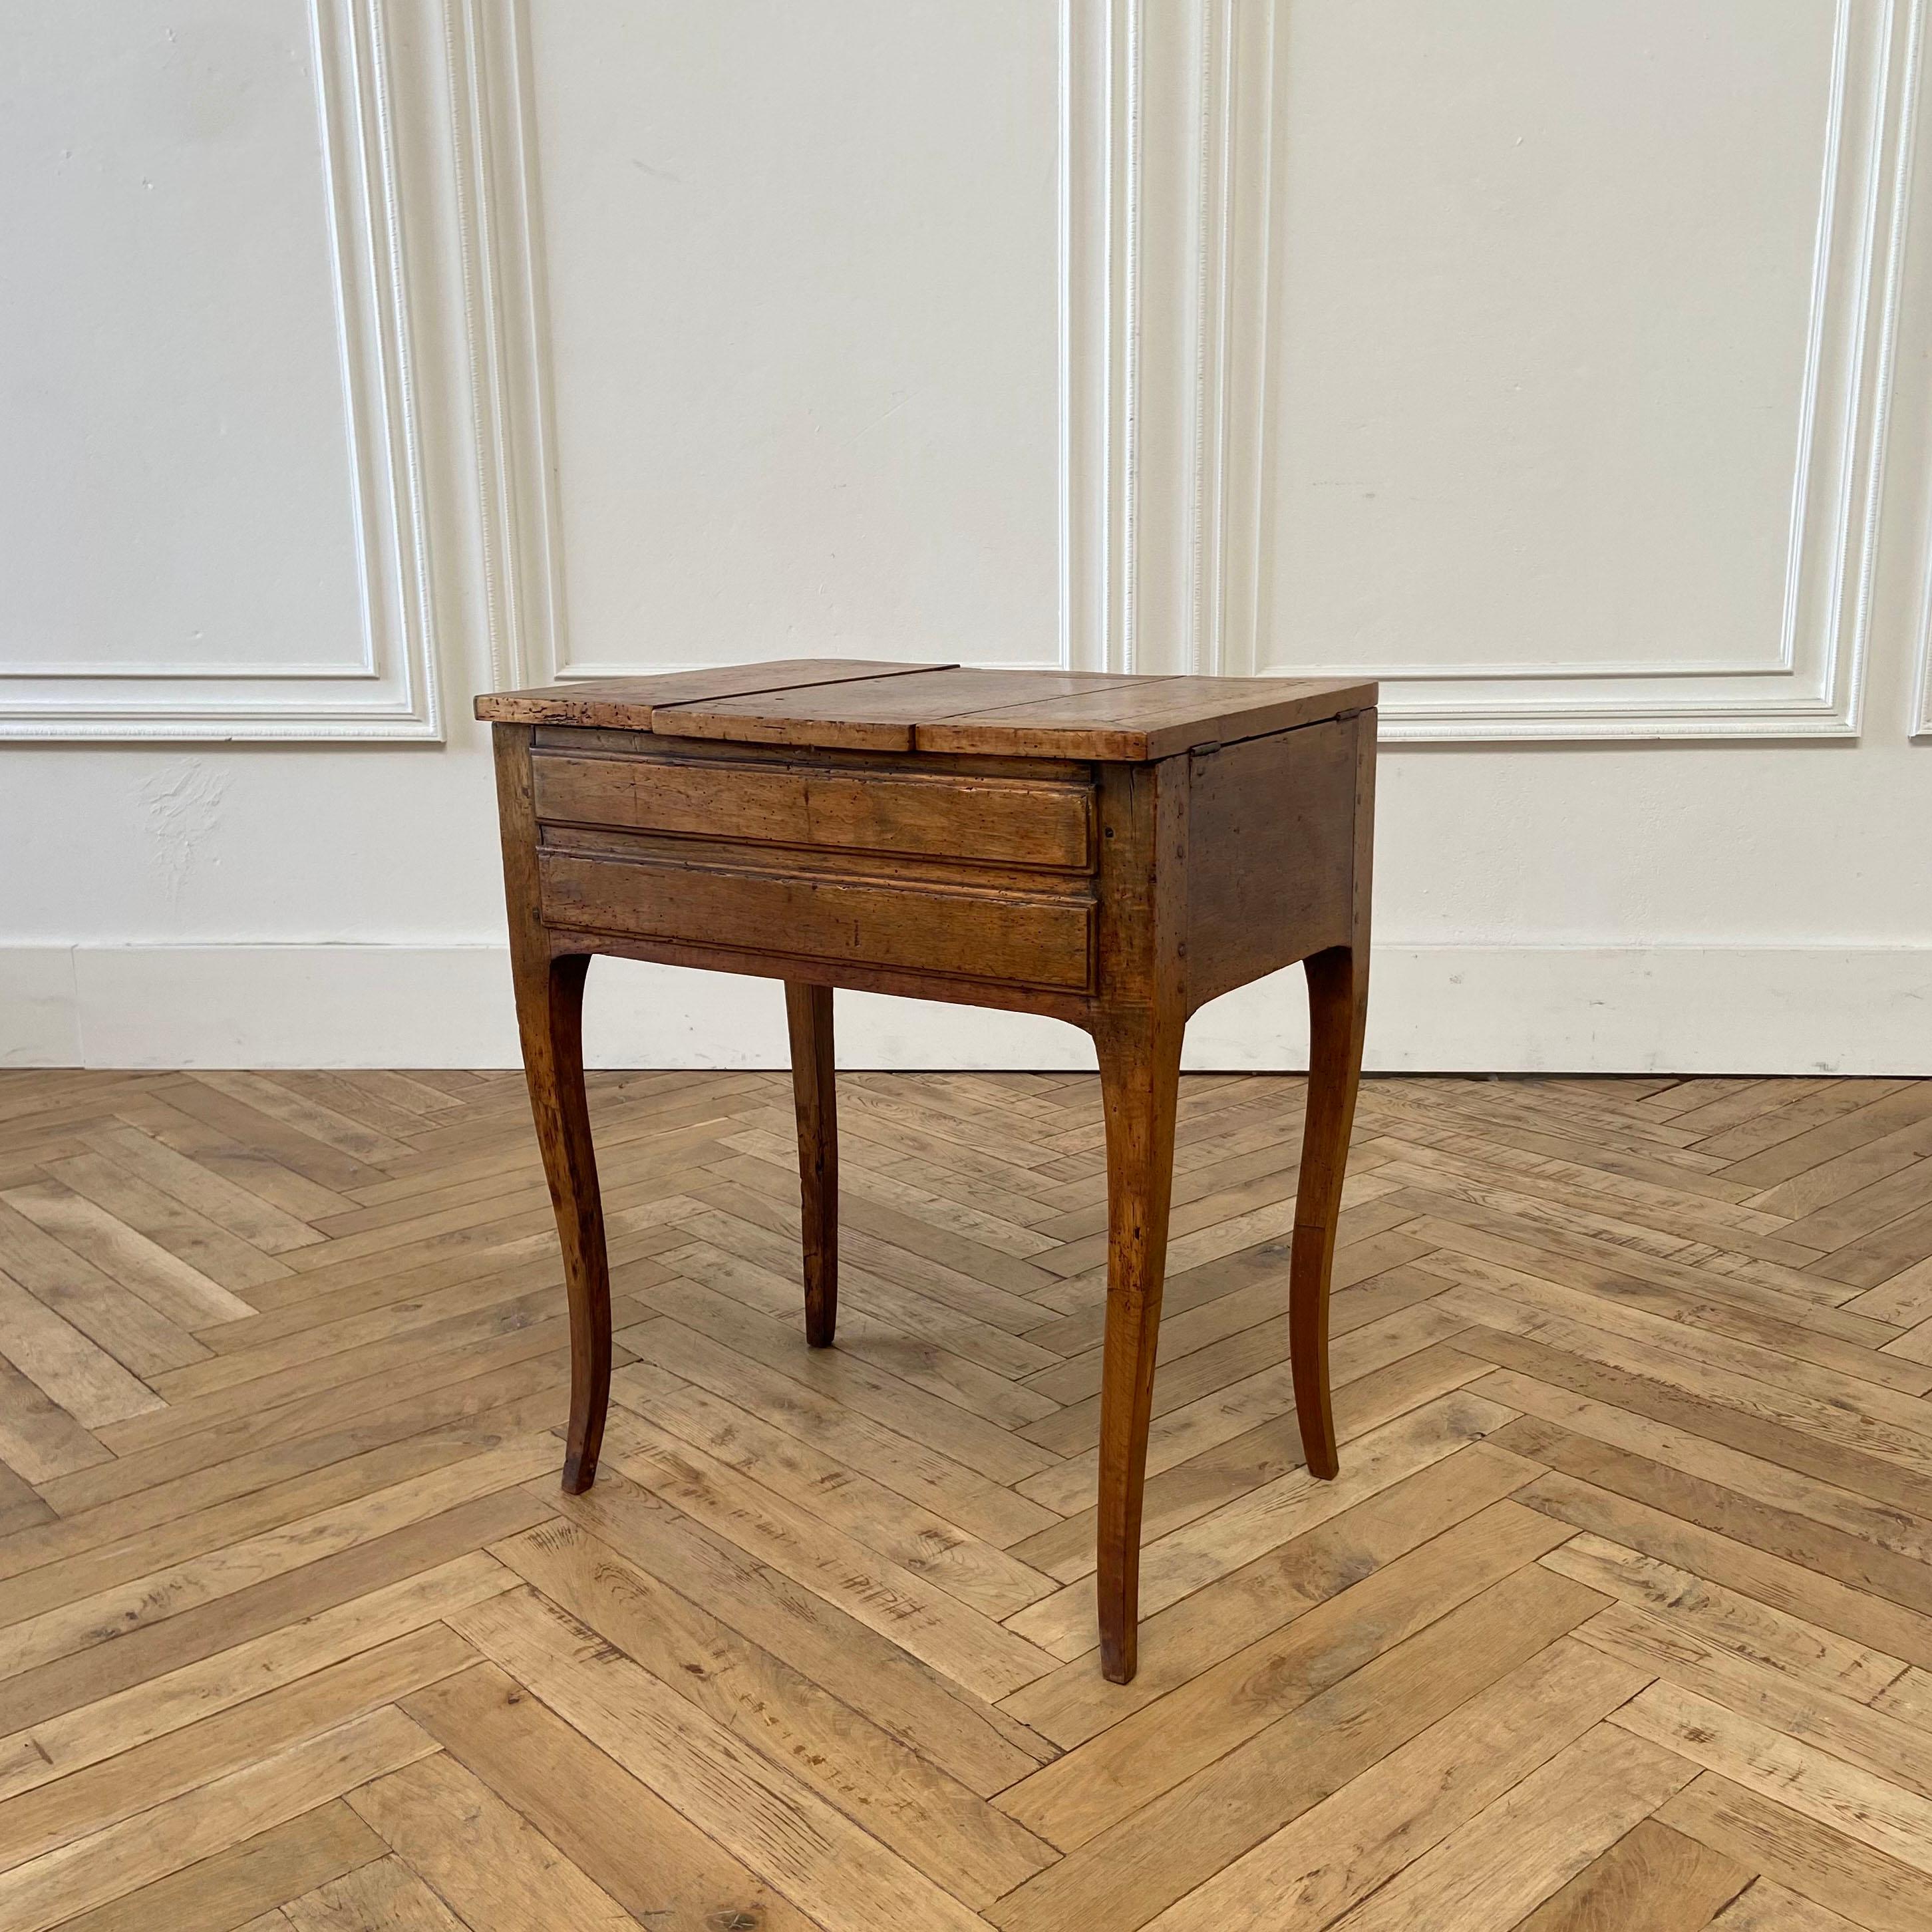 A French provincial fruit wood poudreuse,
first half 19th century
The shaped rectangular top with central hinged mirror flanked by a pair of hinged compartments over a faux drawer, a slide and two small drawers on slender cabriole